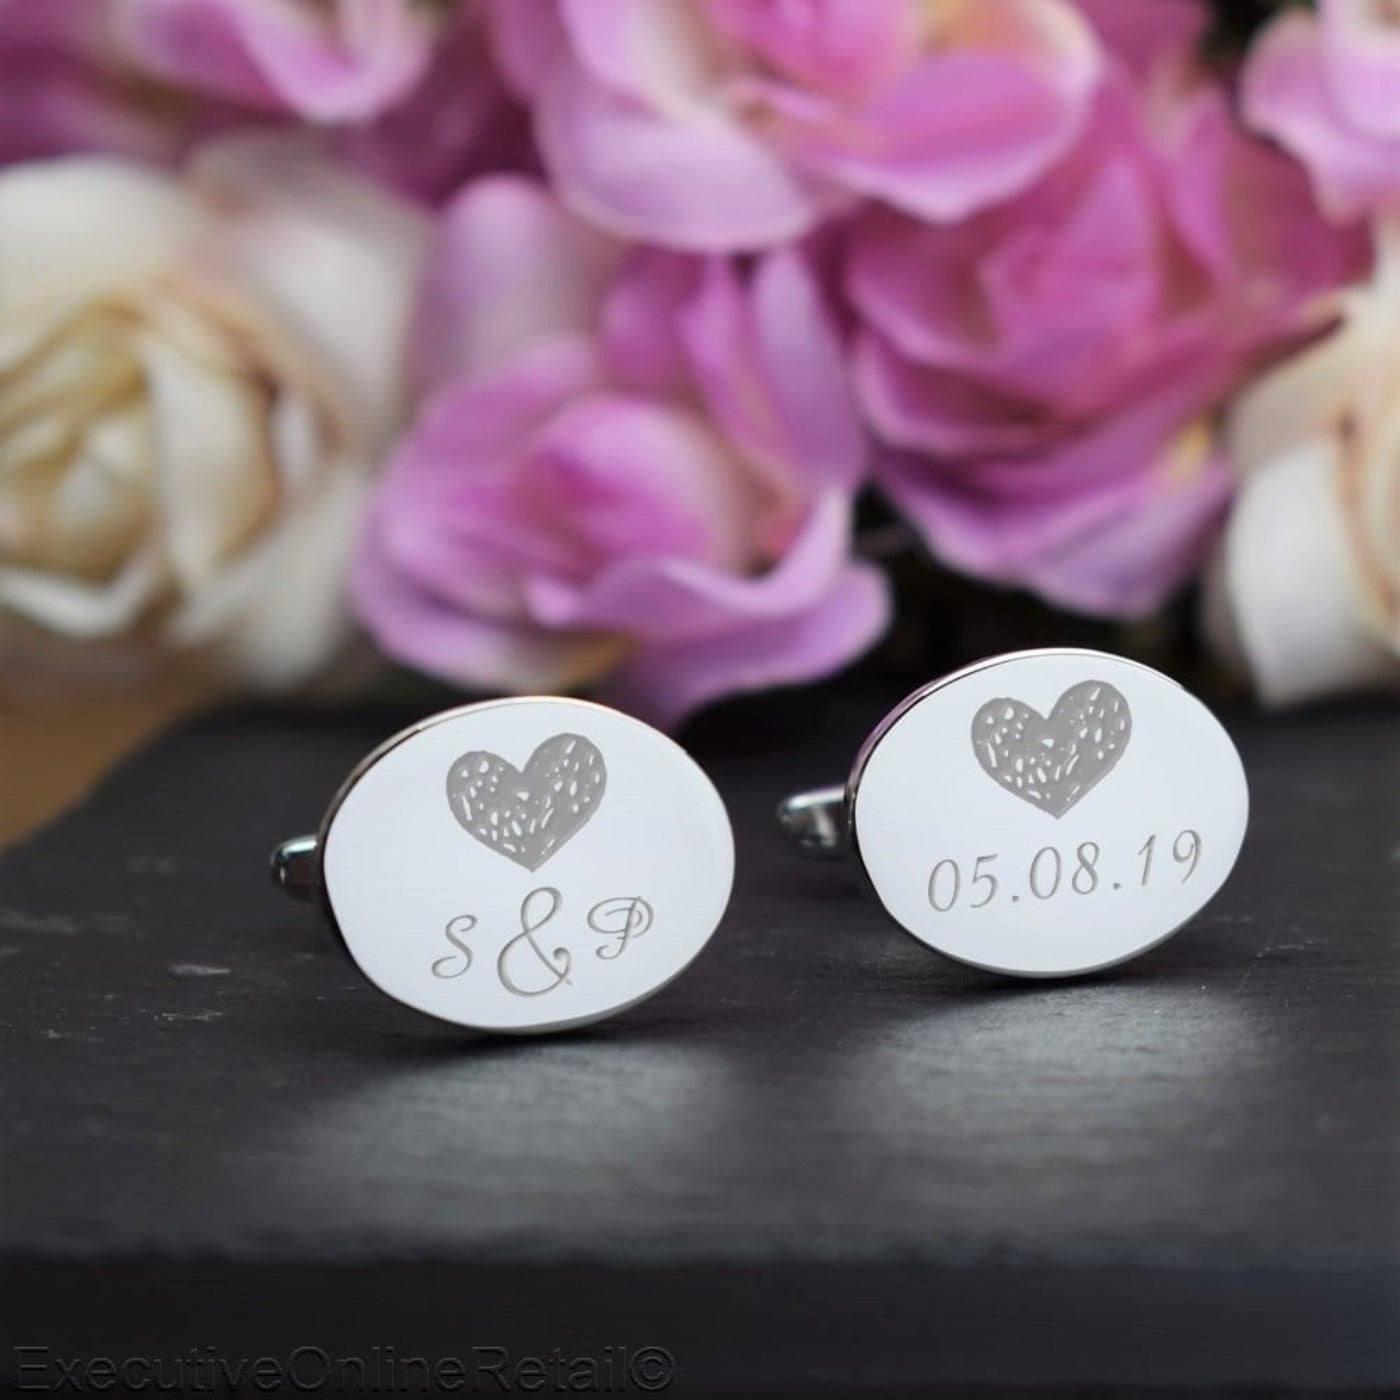 Engraved Wedding Day Oval Cufflinks - Heart and Initials